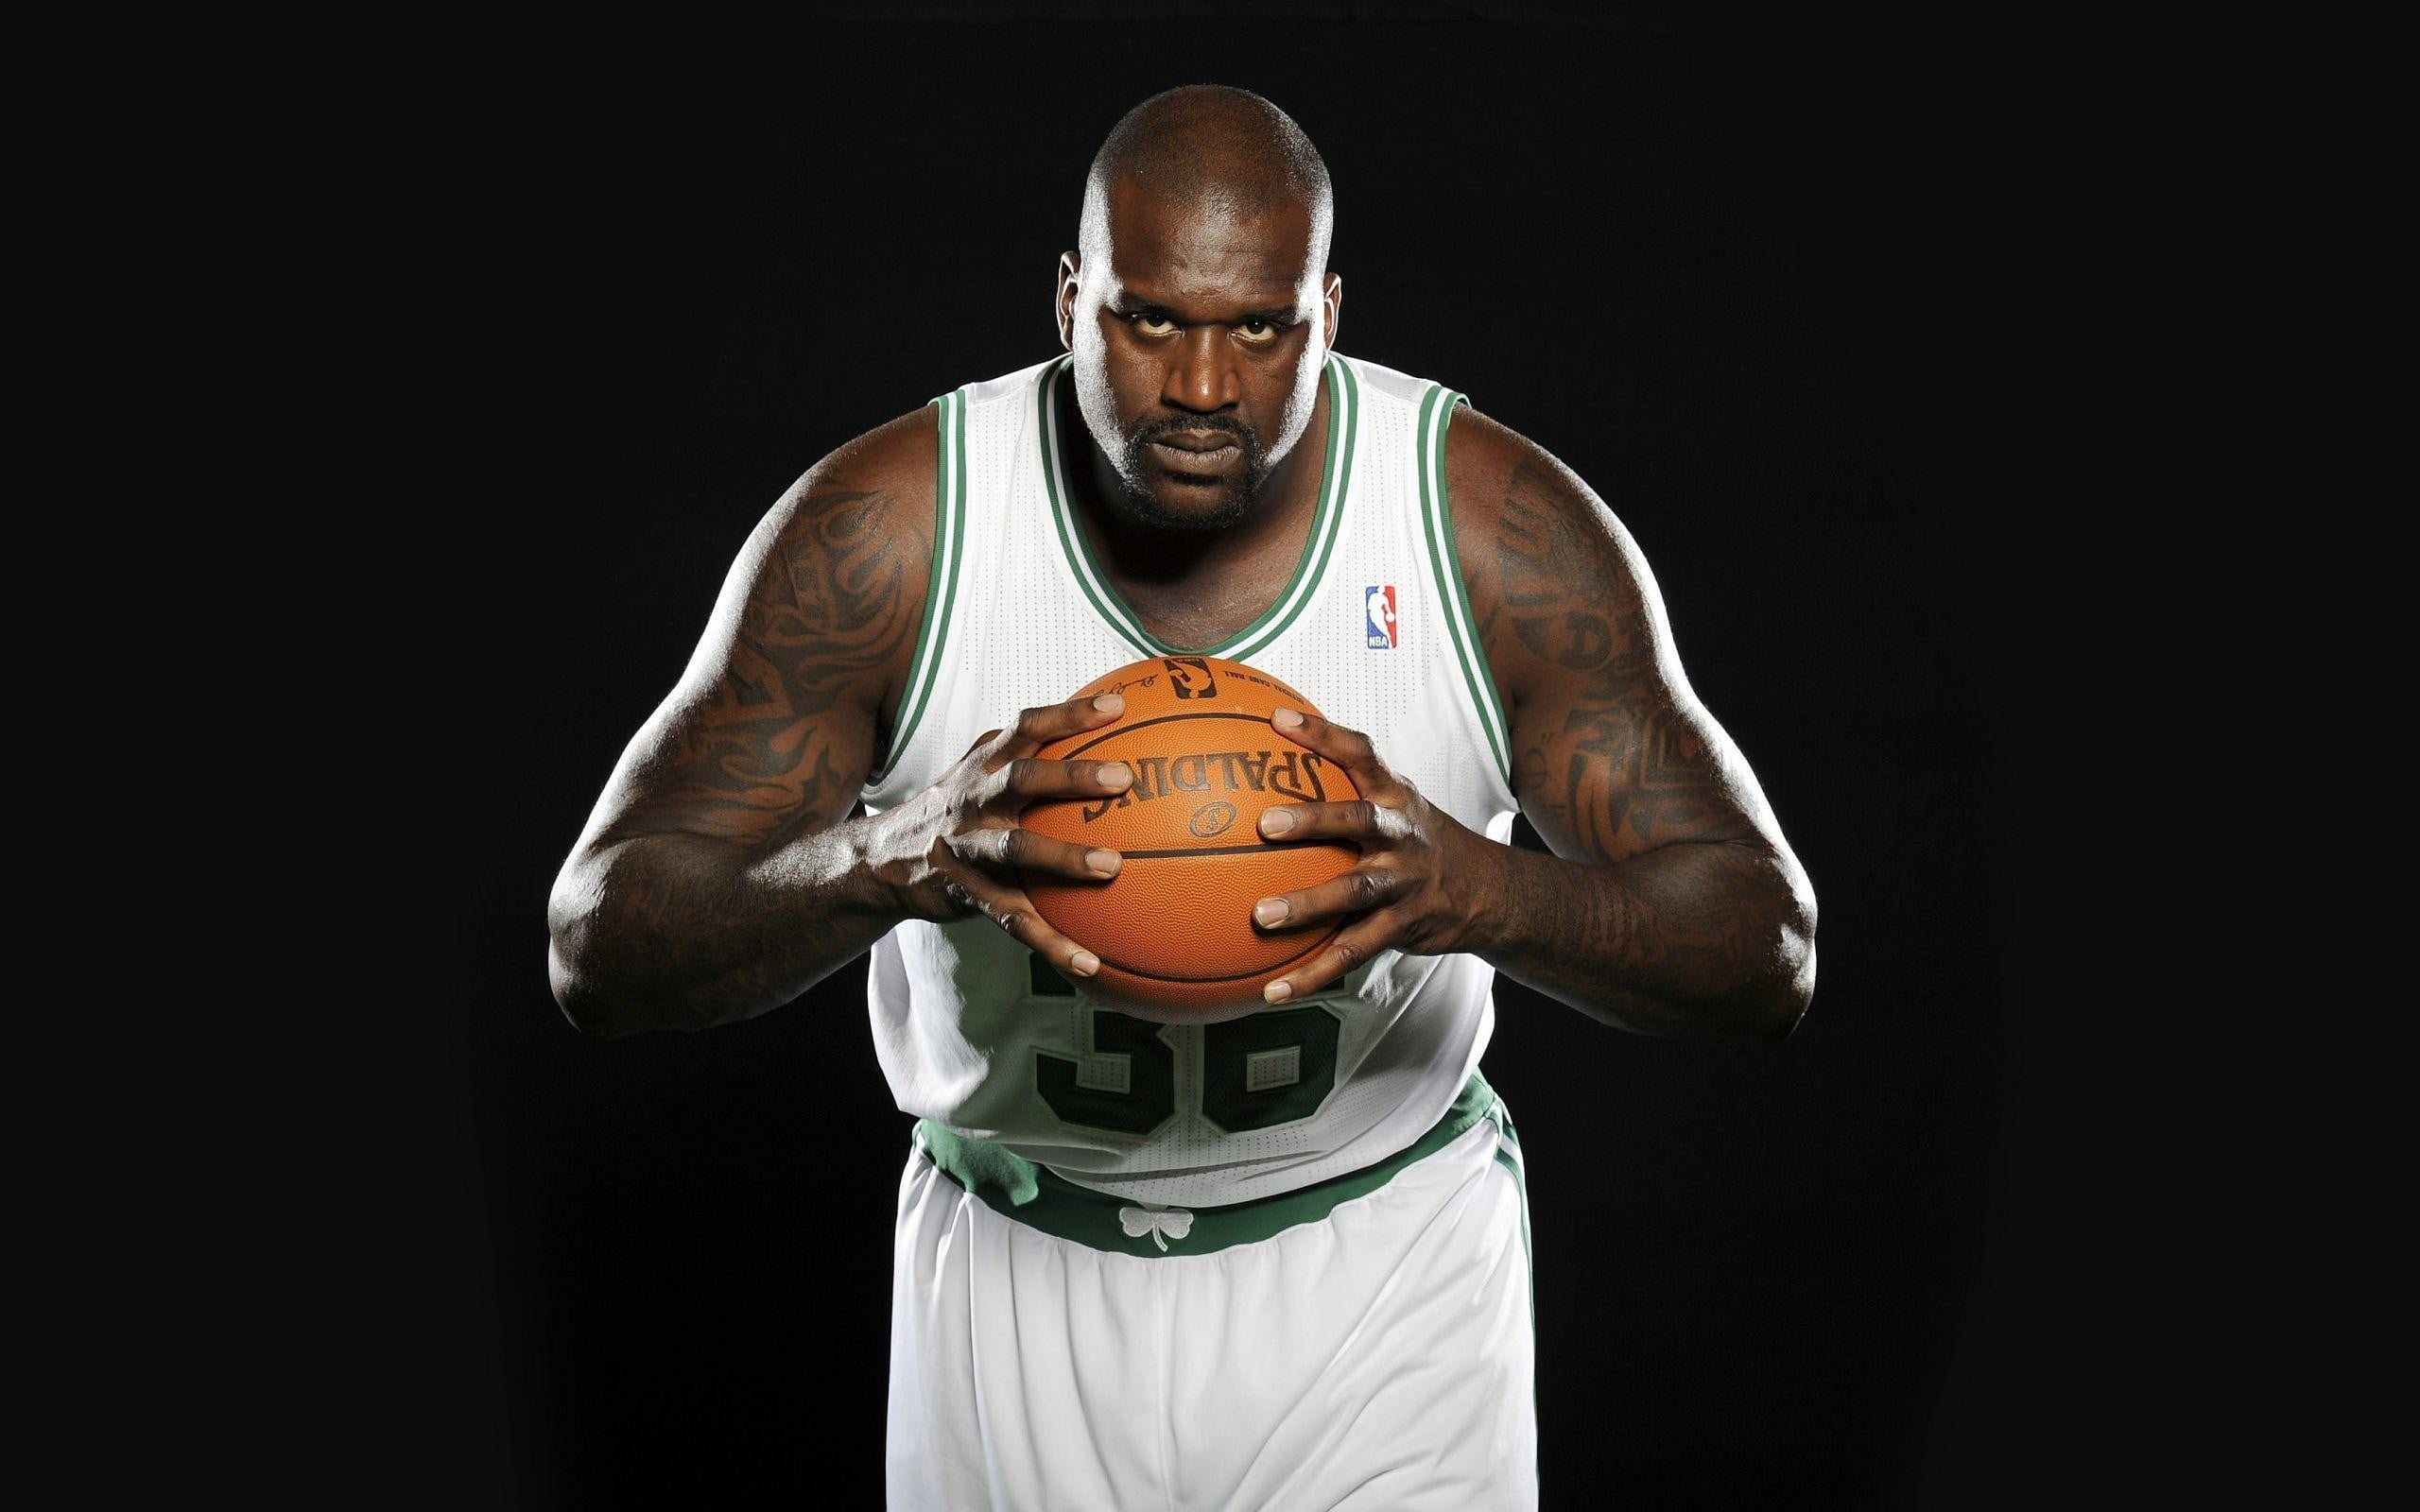 Shaquille O'Neal, basketball, Boston Celtics, sports, Shaquille O'Neal